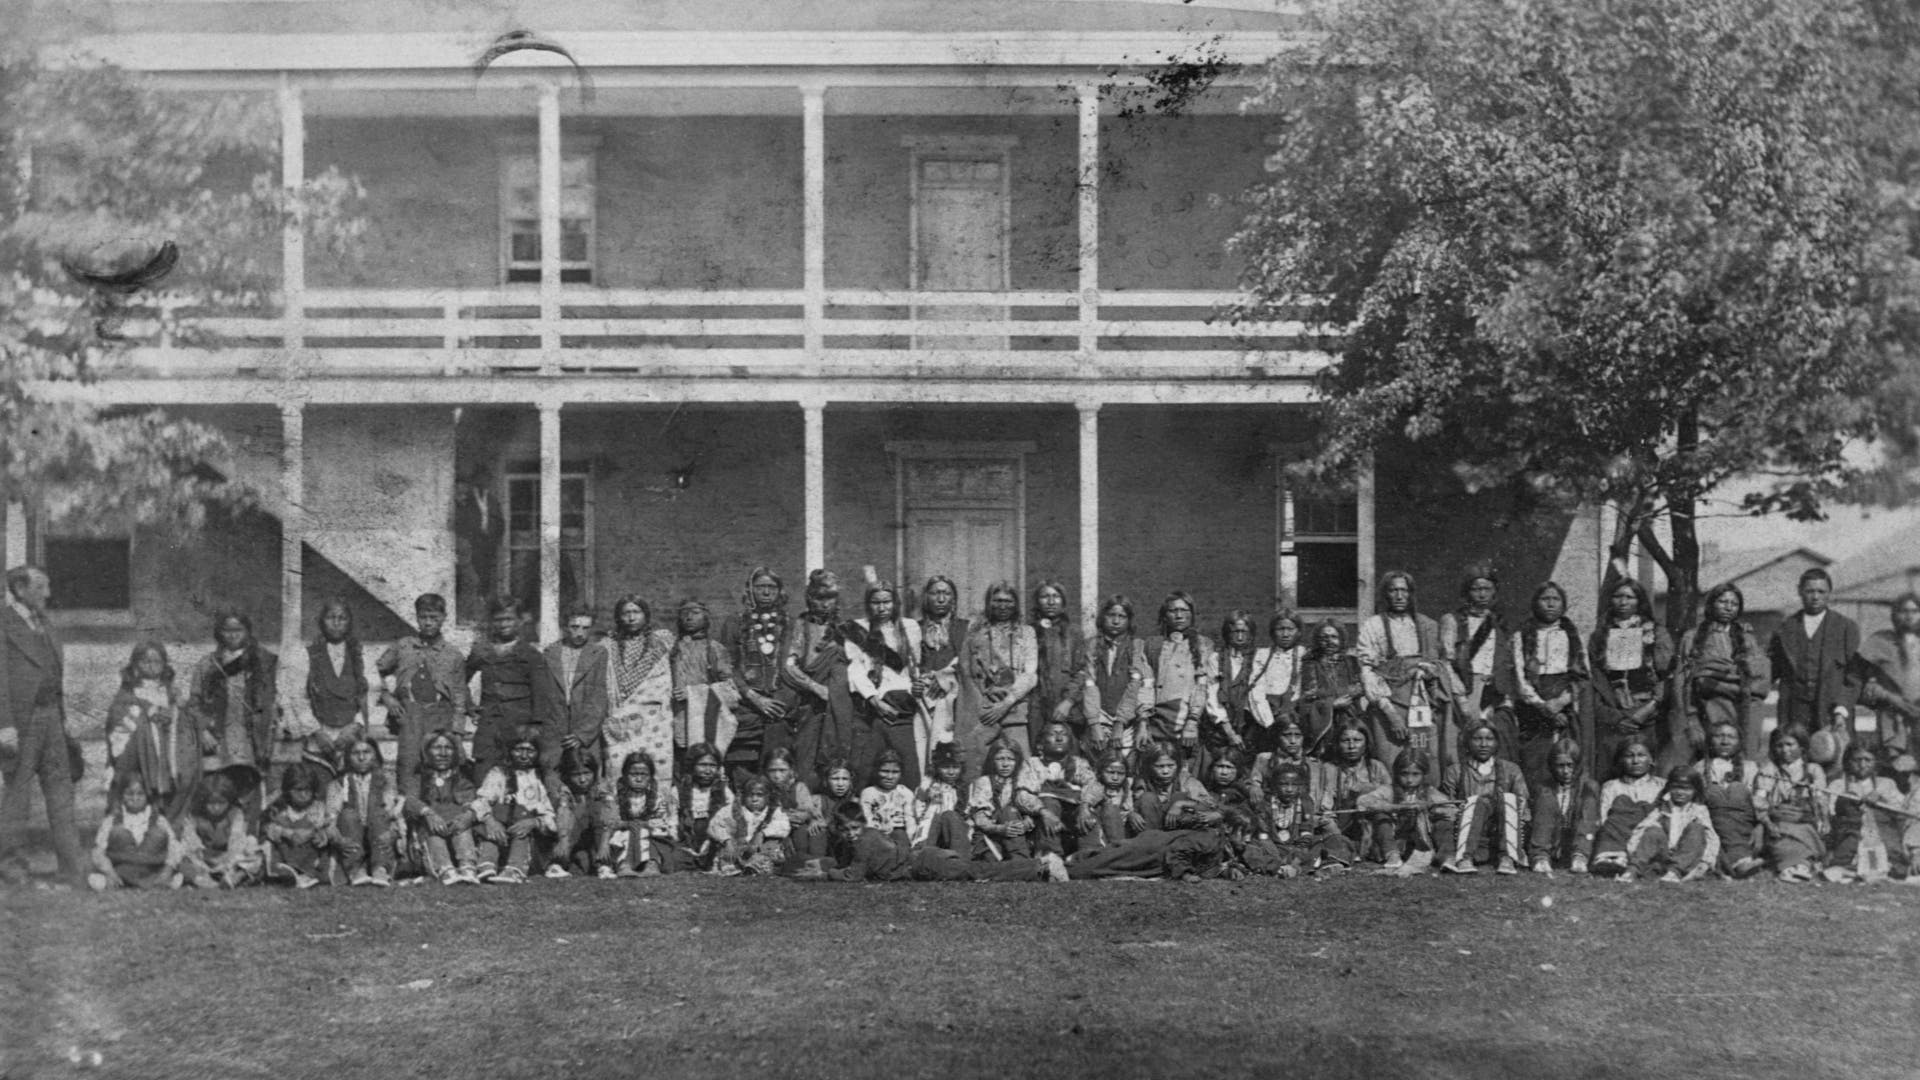 Sioux boys arrive at the Carlisle School, October 5, 1879. (Credit: Corbis/Getty Images)